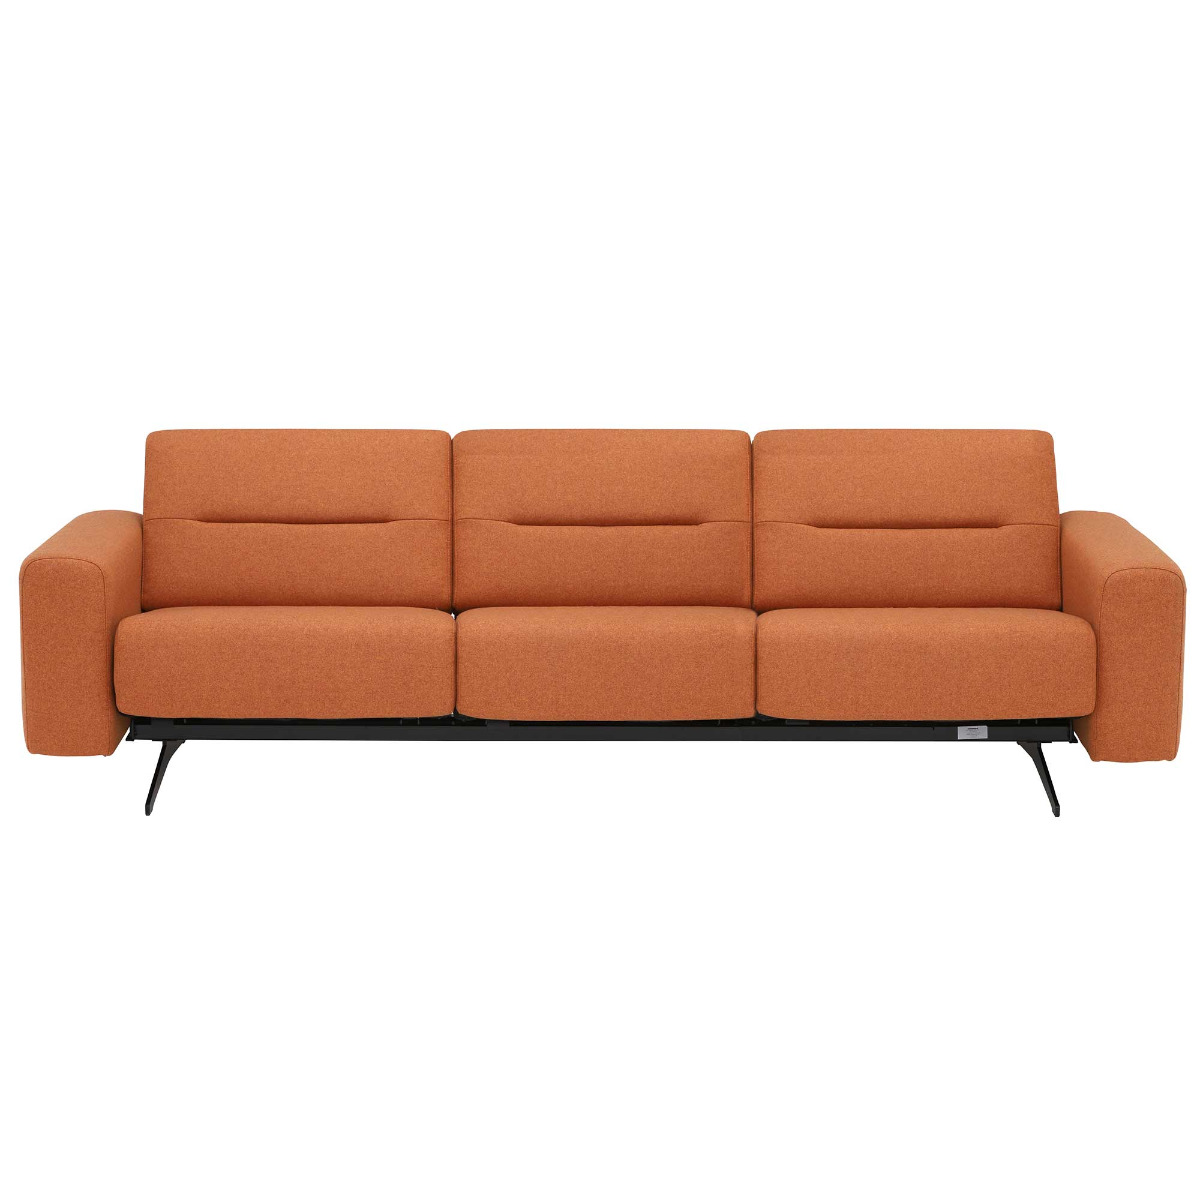 Stressless Stella 3 Seater With S1 Arms Recliner Sofa, Orange Leather | Barker & Stonehouse